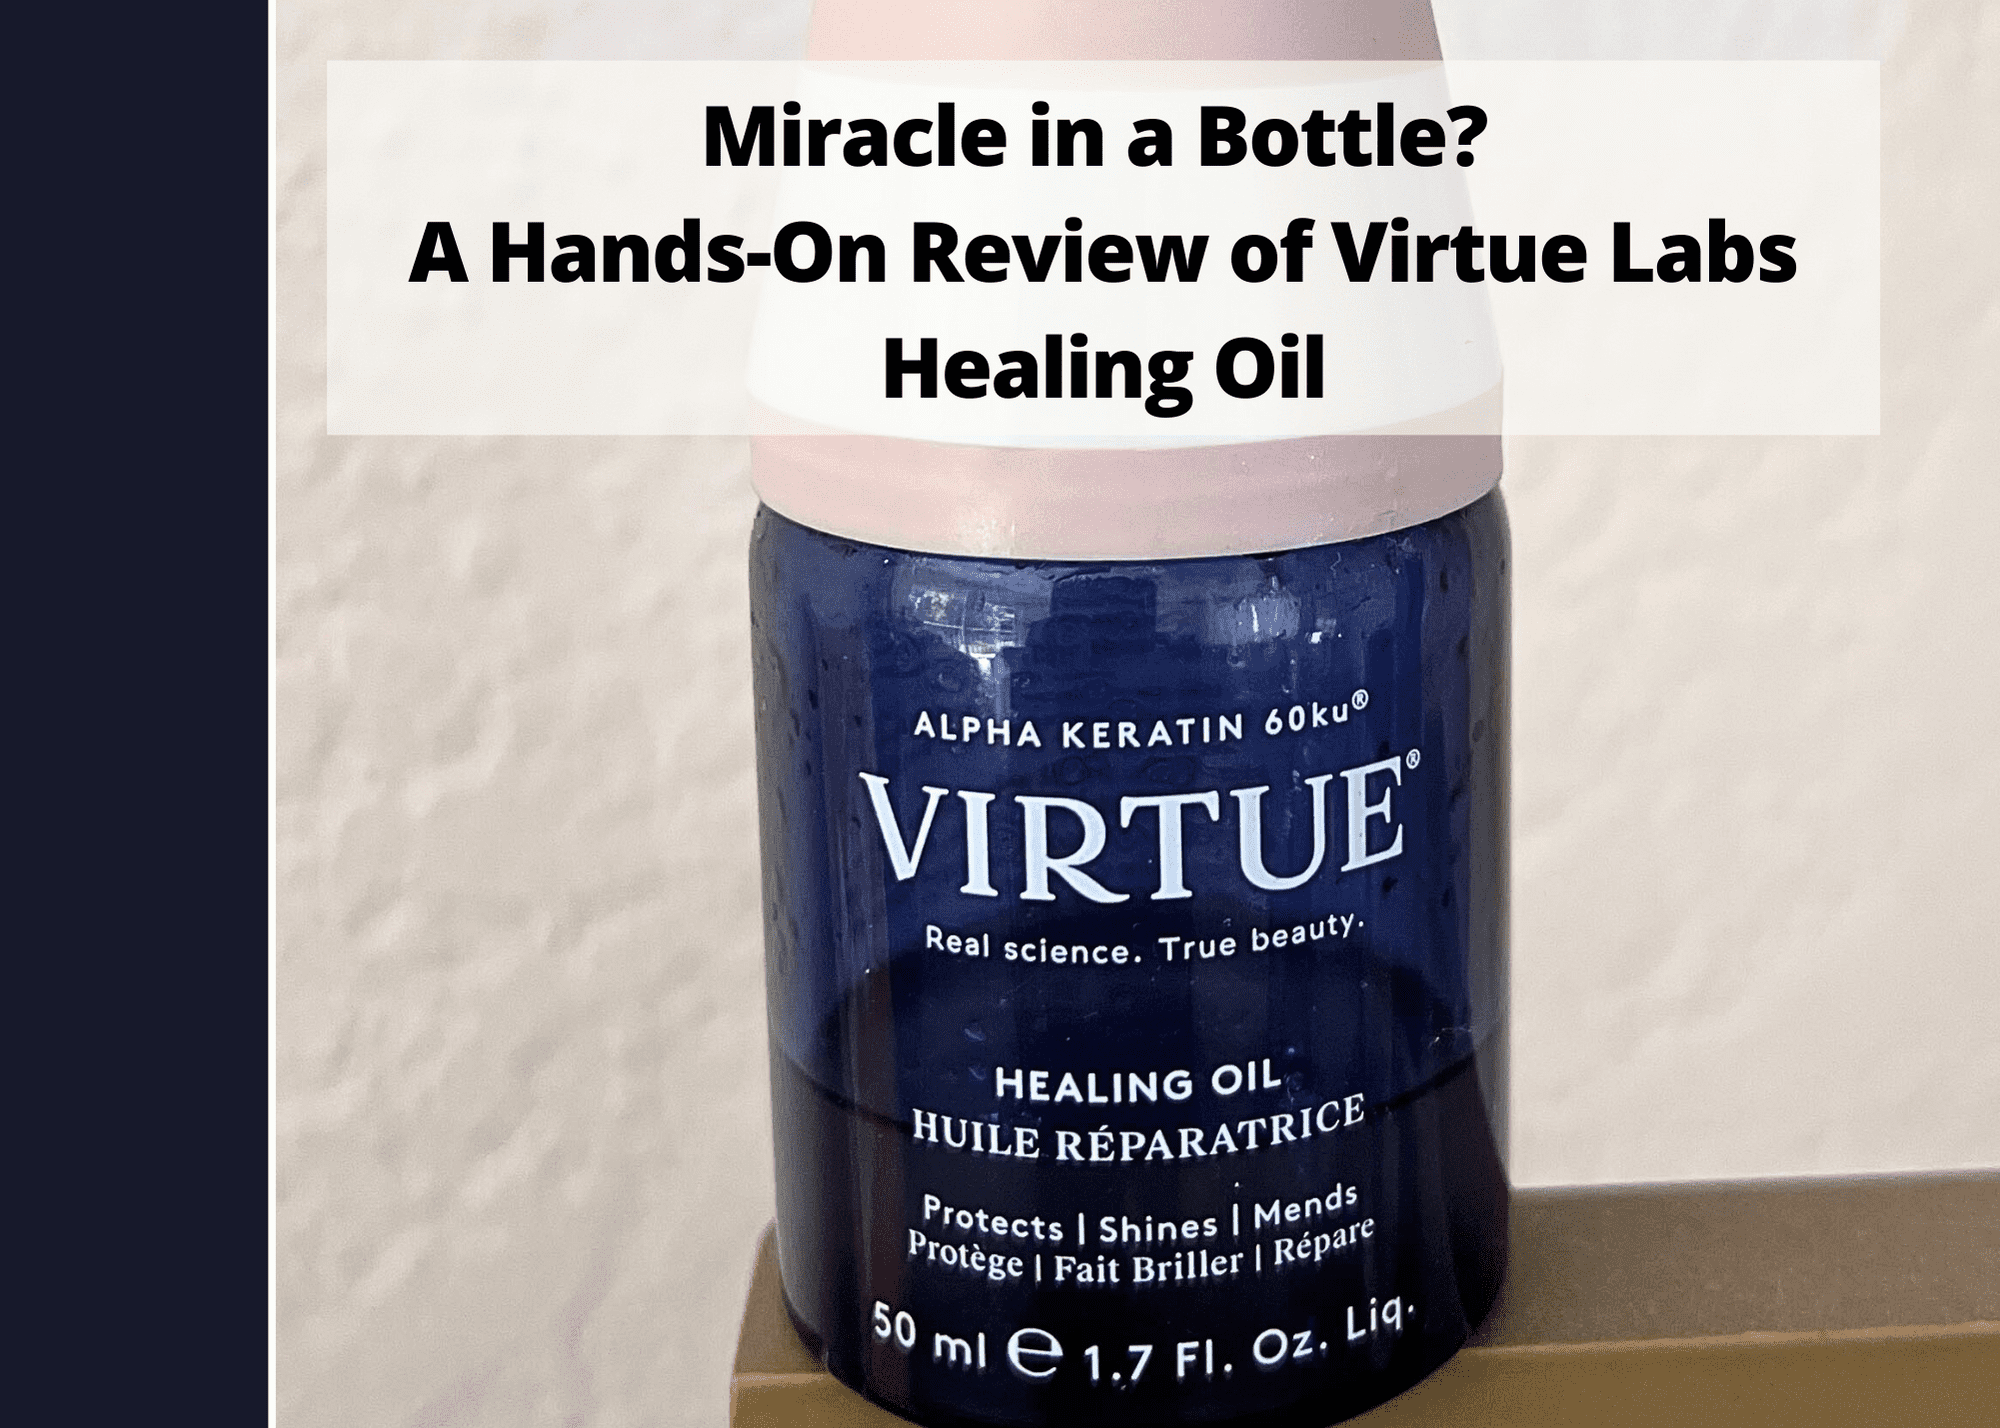 Review virtue labs healing oil